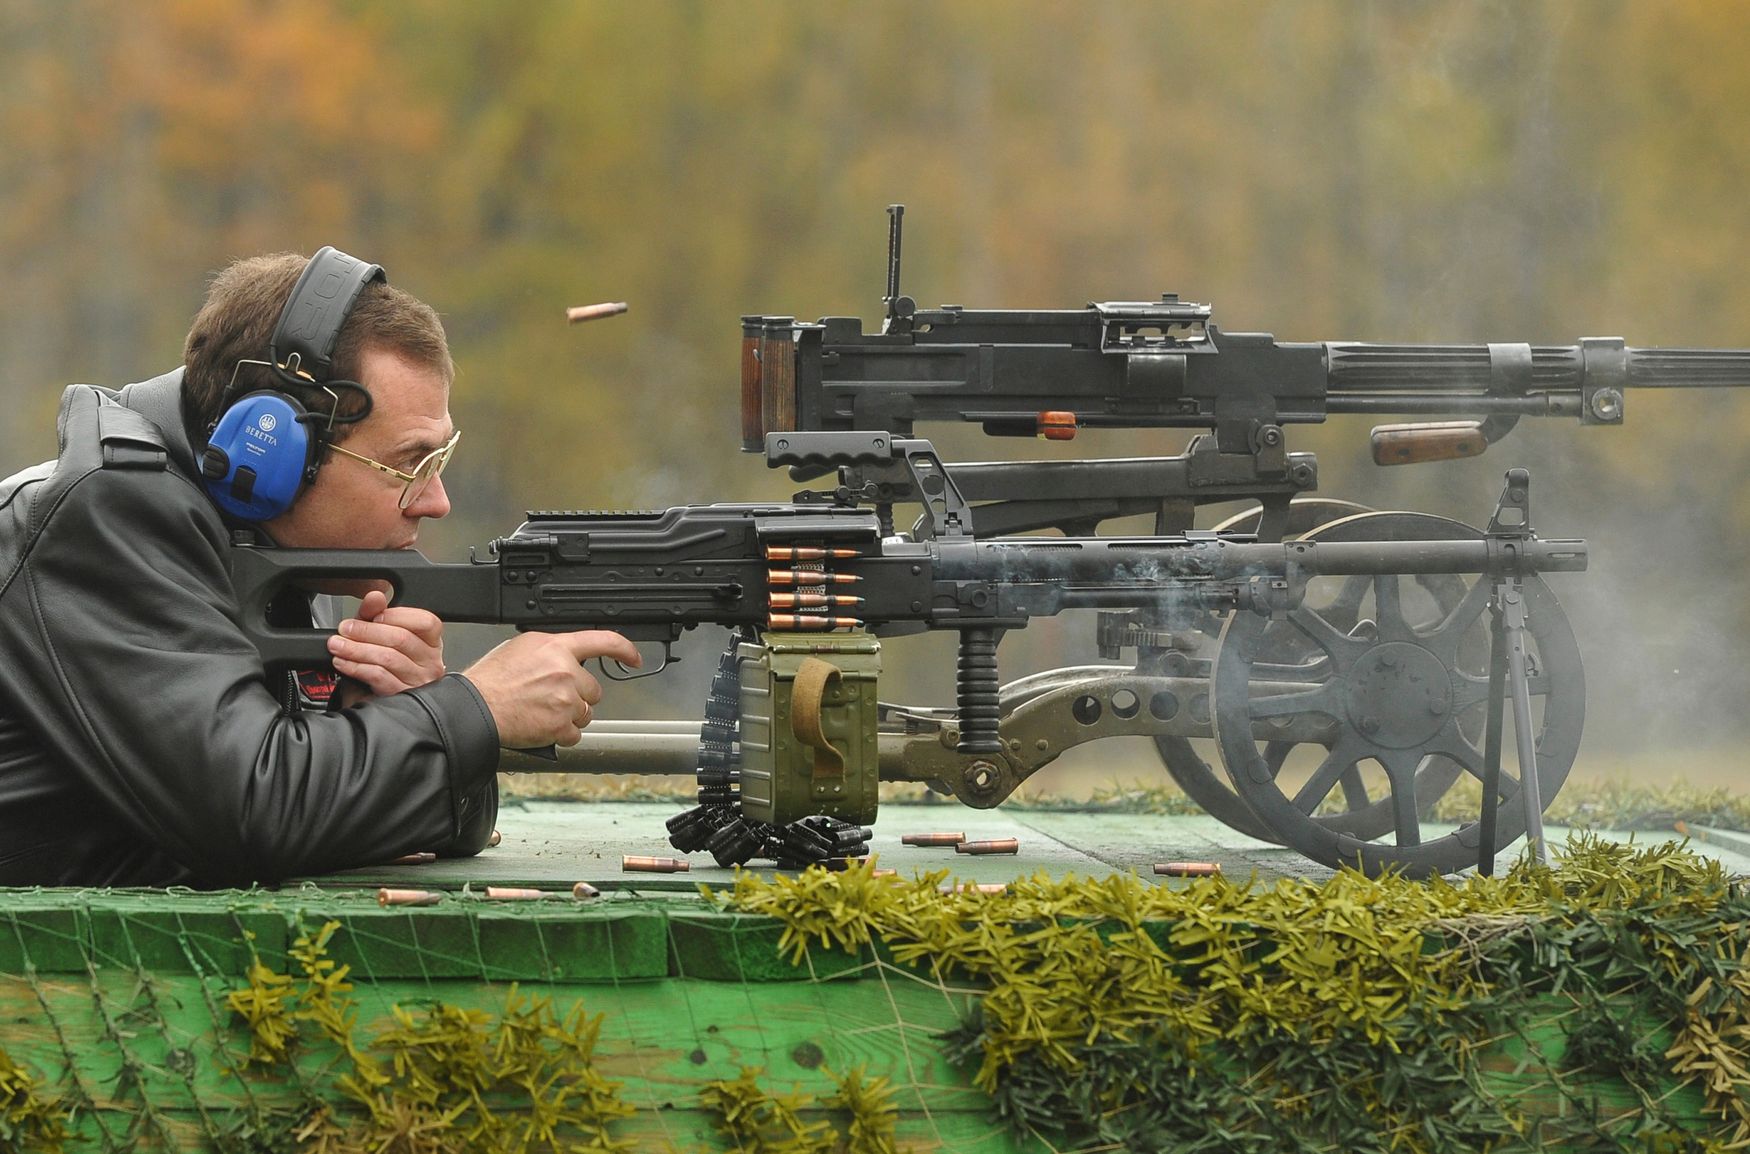 How Russias Military Might Have Come Up With A Super Machine Gun The